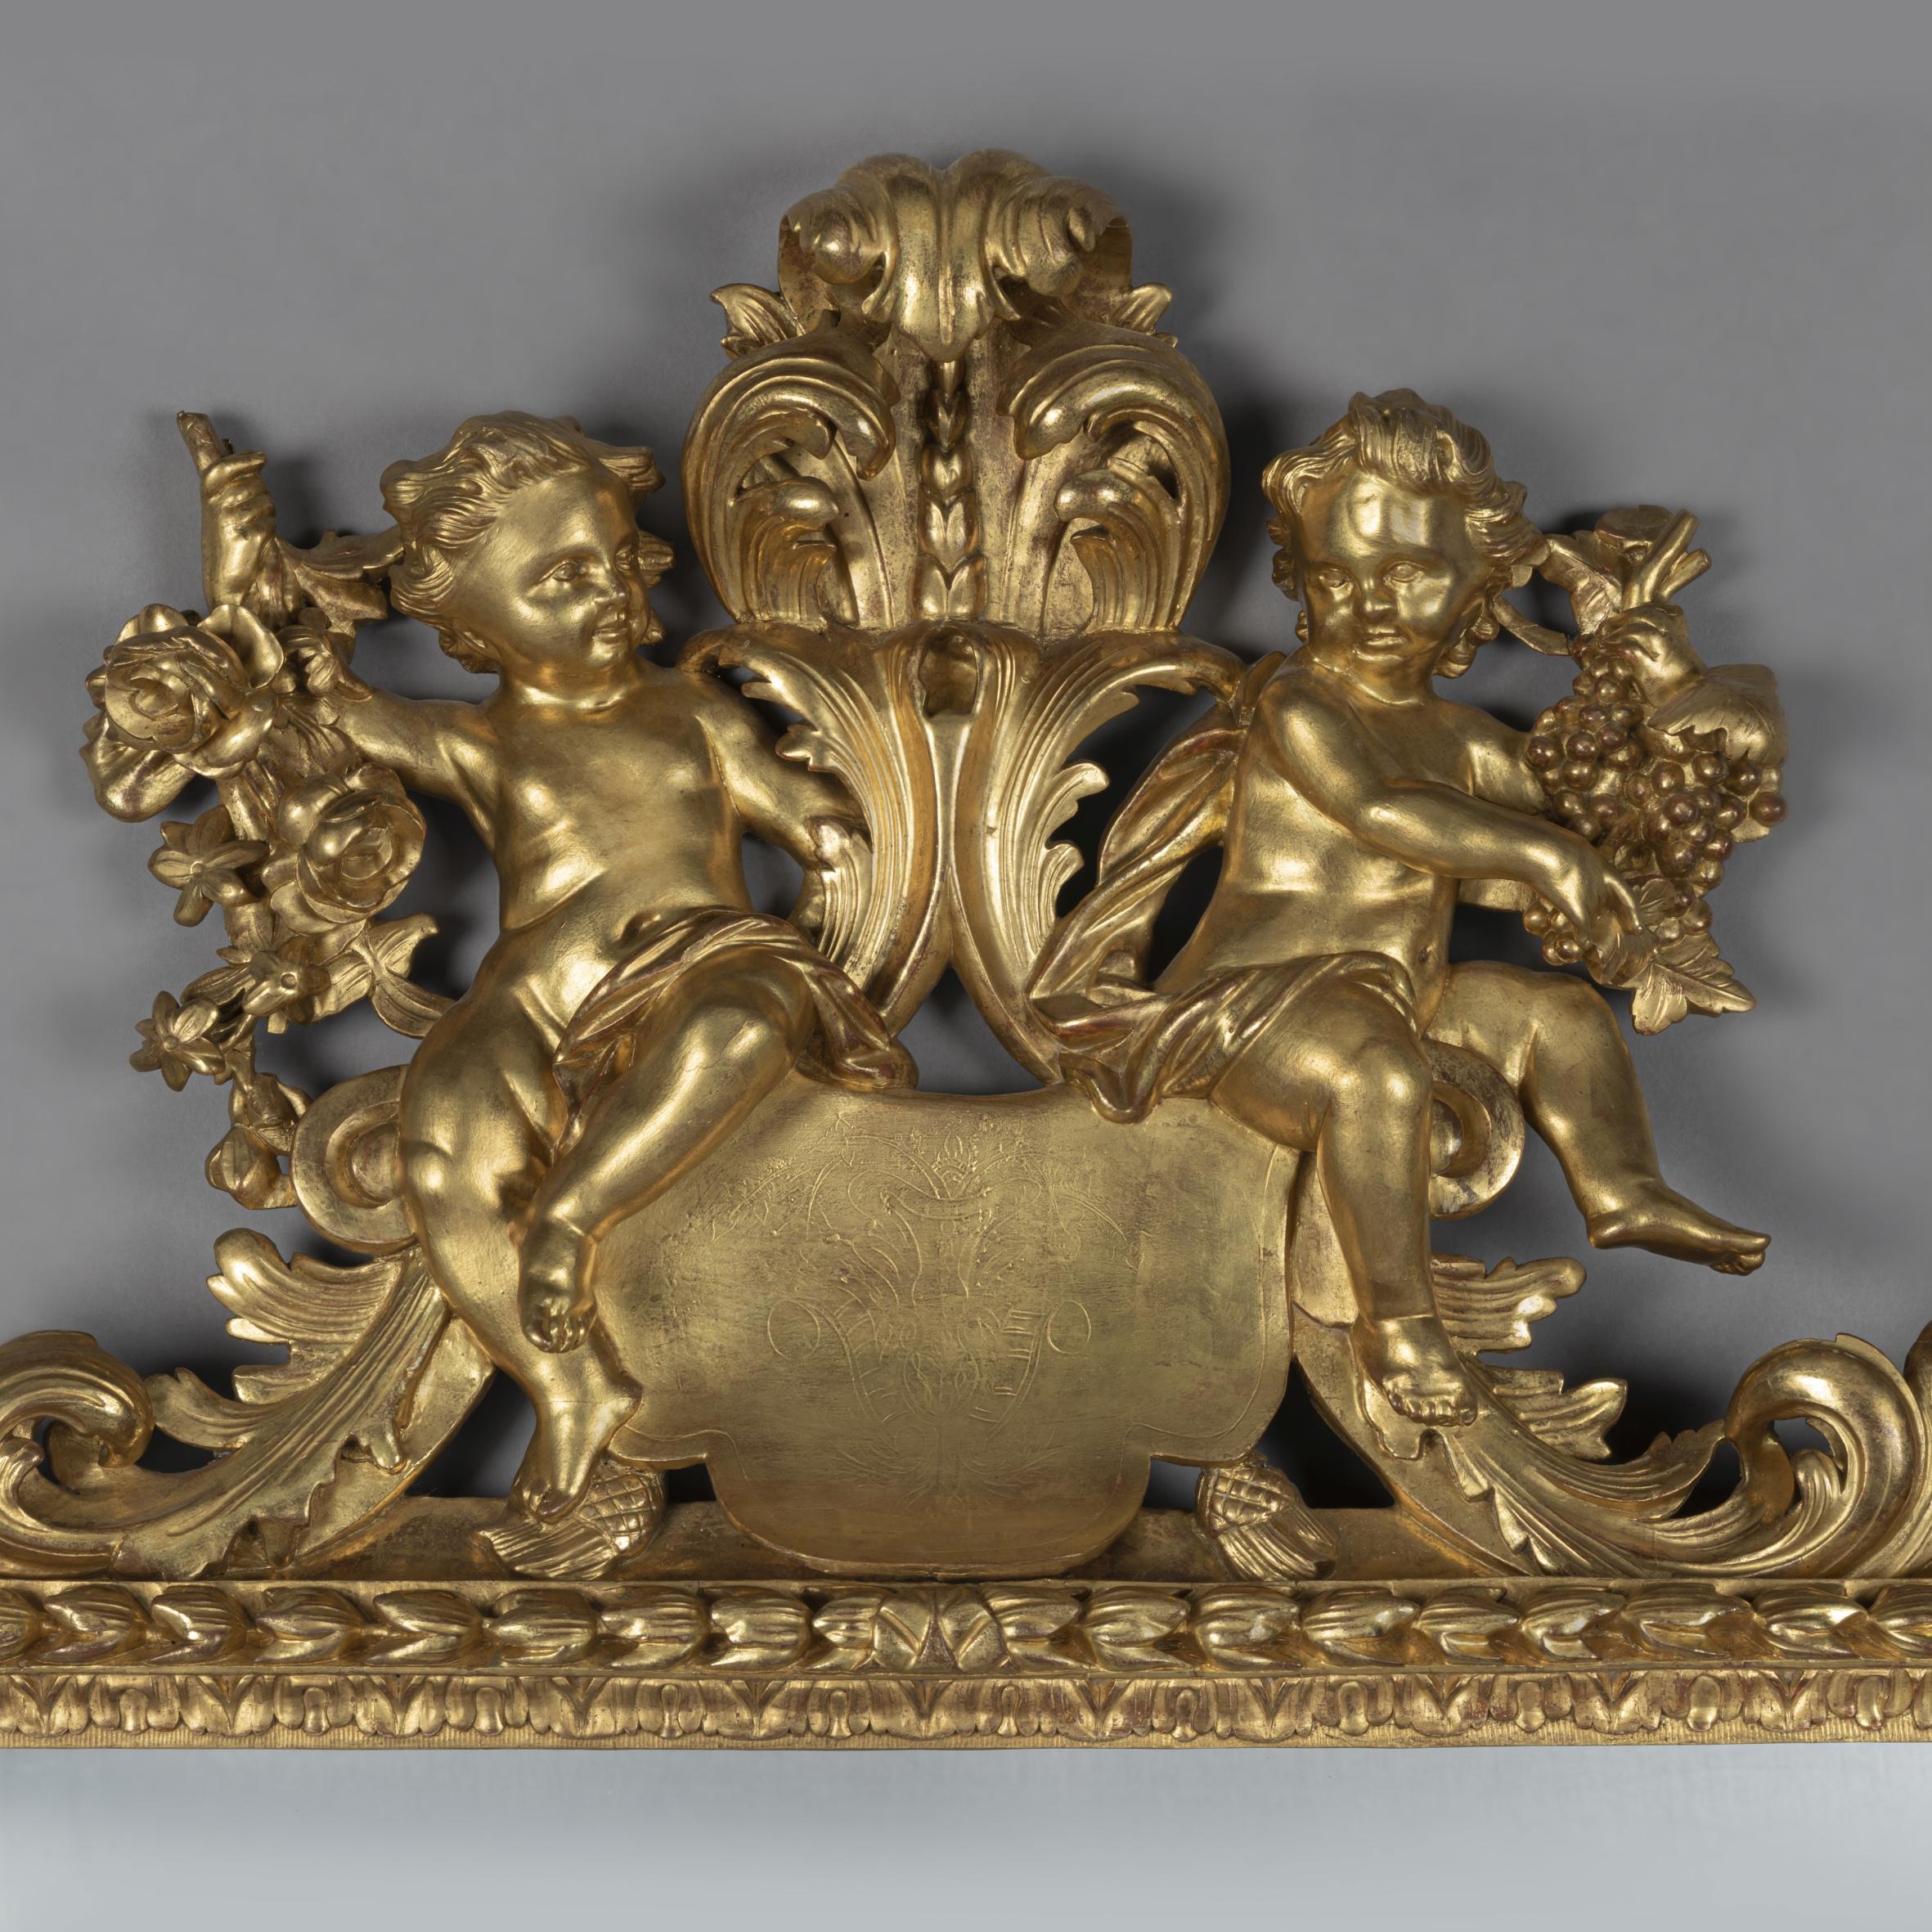 A fine North Italian, Baroque Revival, carved giltwood mirror allegorical of the seasons.

This finely carved mirror has a rectangular mirror plate within a harebell running border surmounted by a finely carved fronded acanthus cresting with two